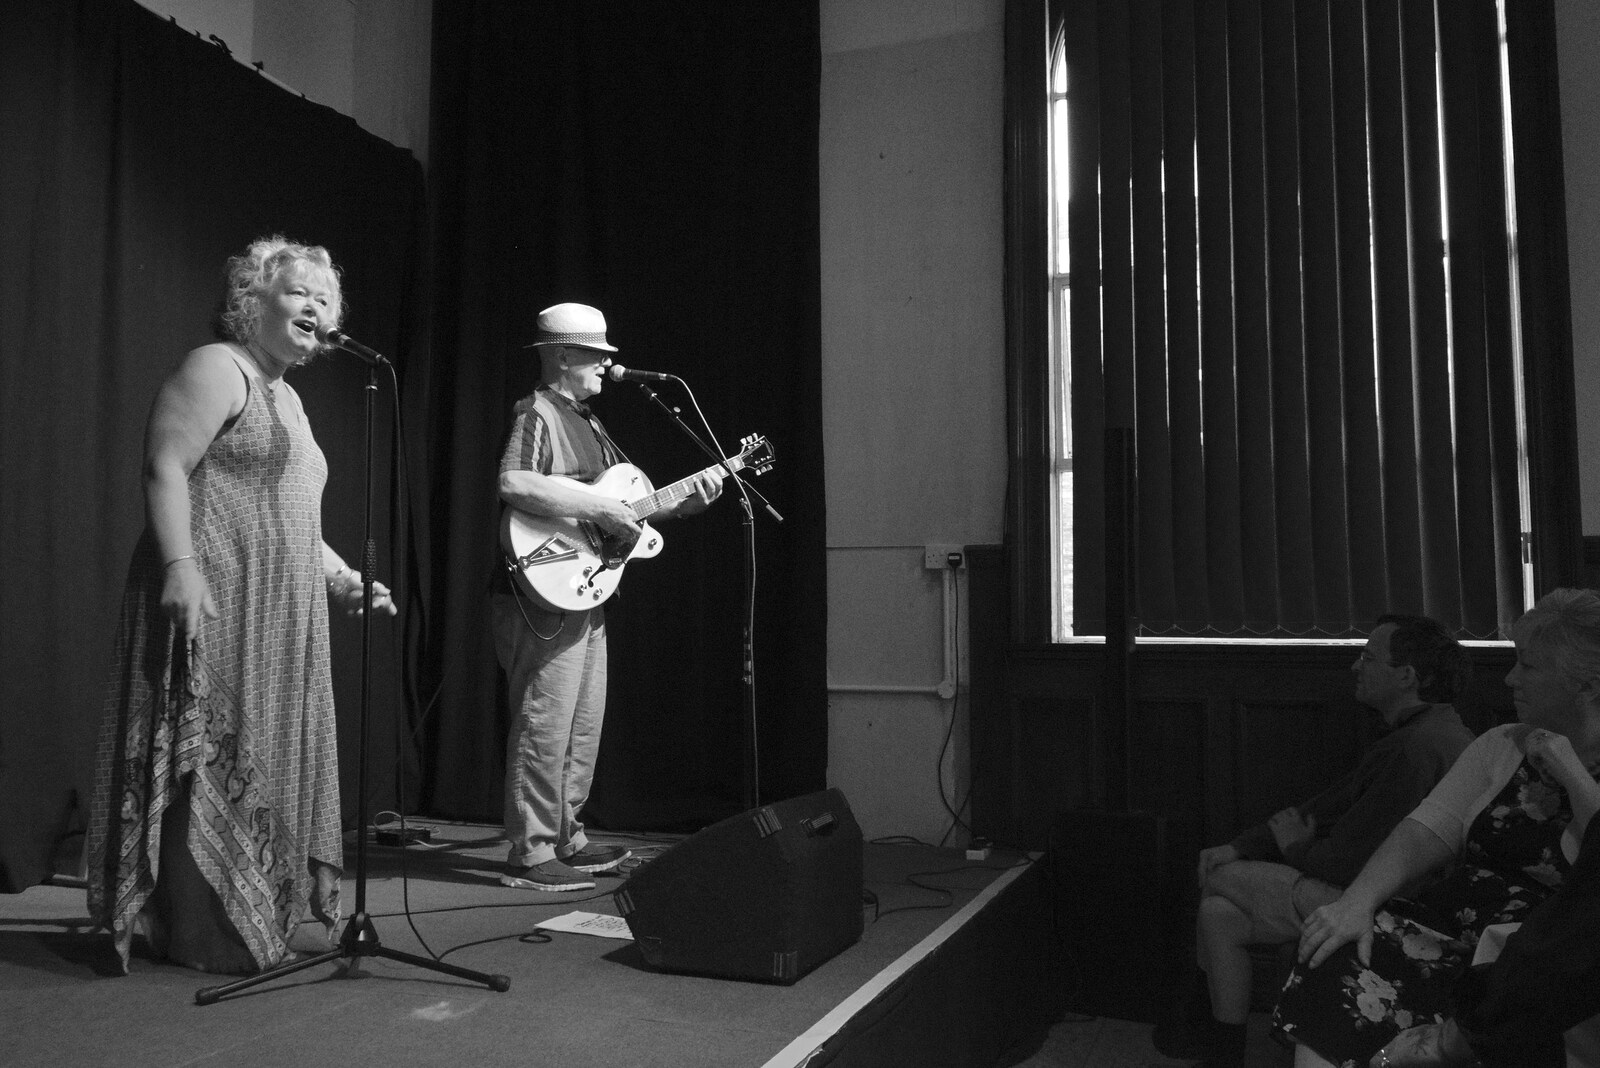 A Norwich Trip, and Rob Folkard and Jo at The Bank, Eye, Suffolk - 20th August 2022: Jo sings